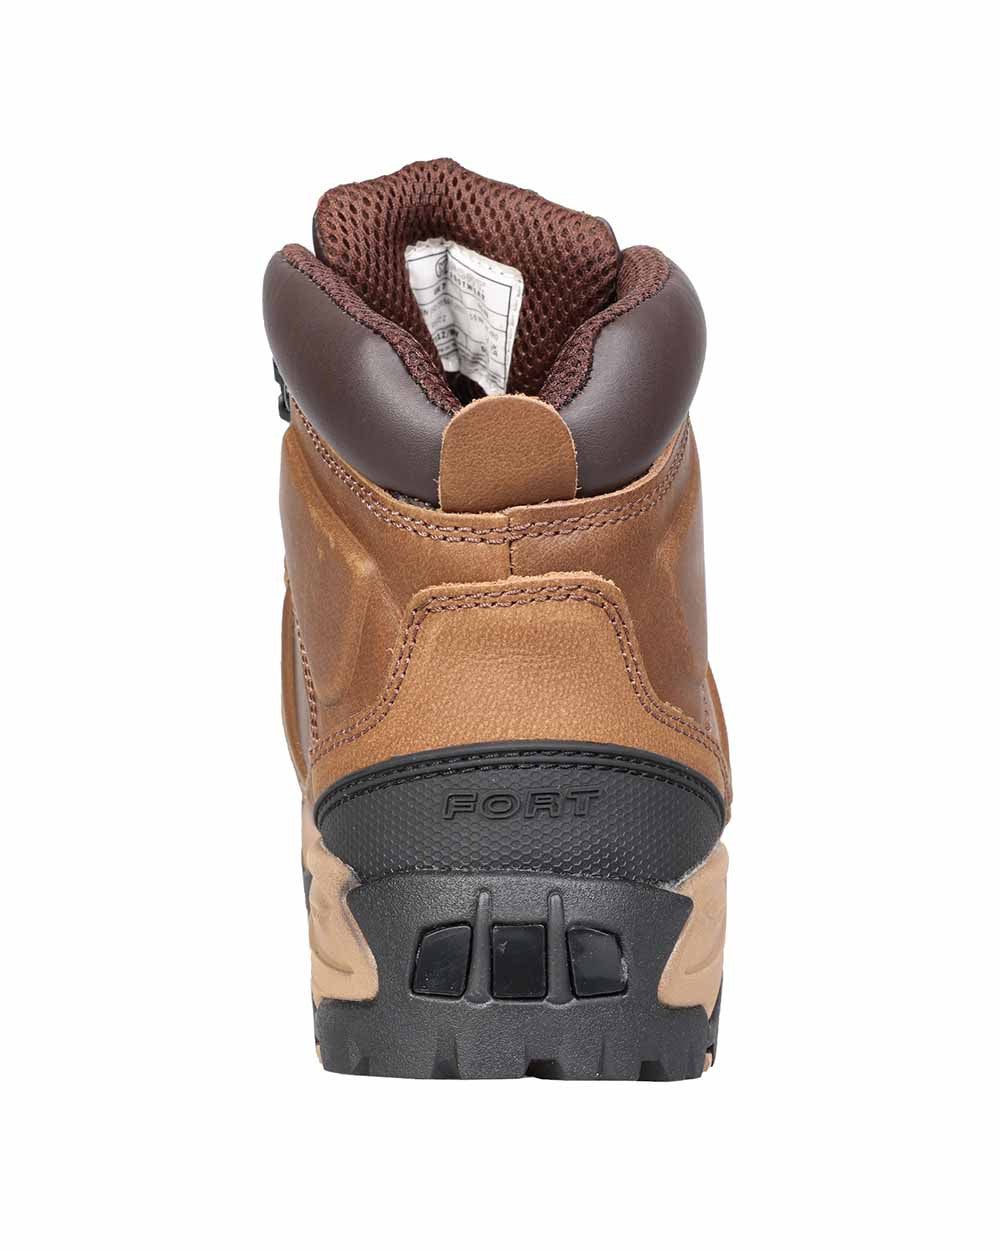 Brown Coloured Fort Deben Waterproof Safety Boot On A White Background 